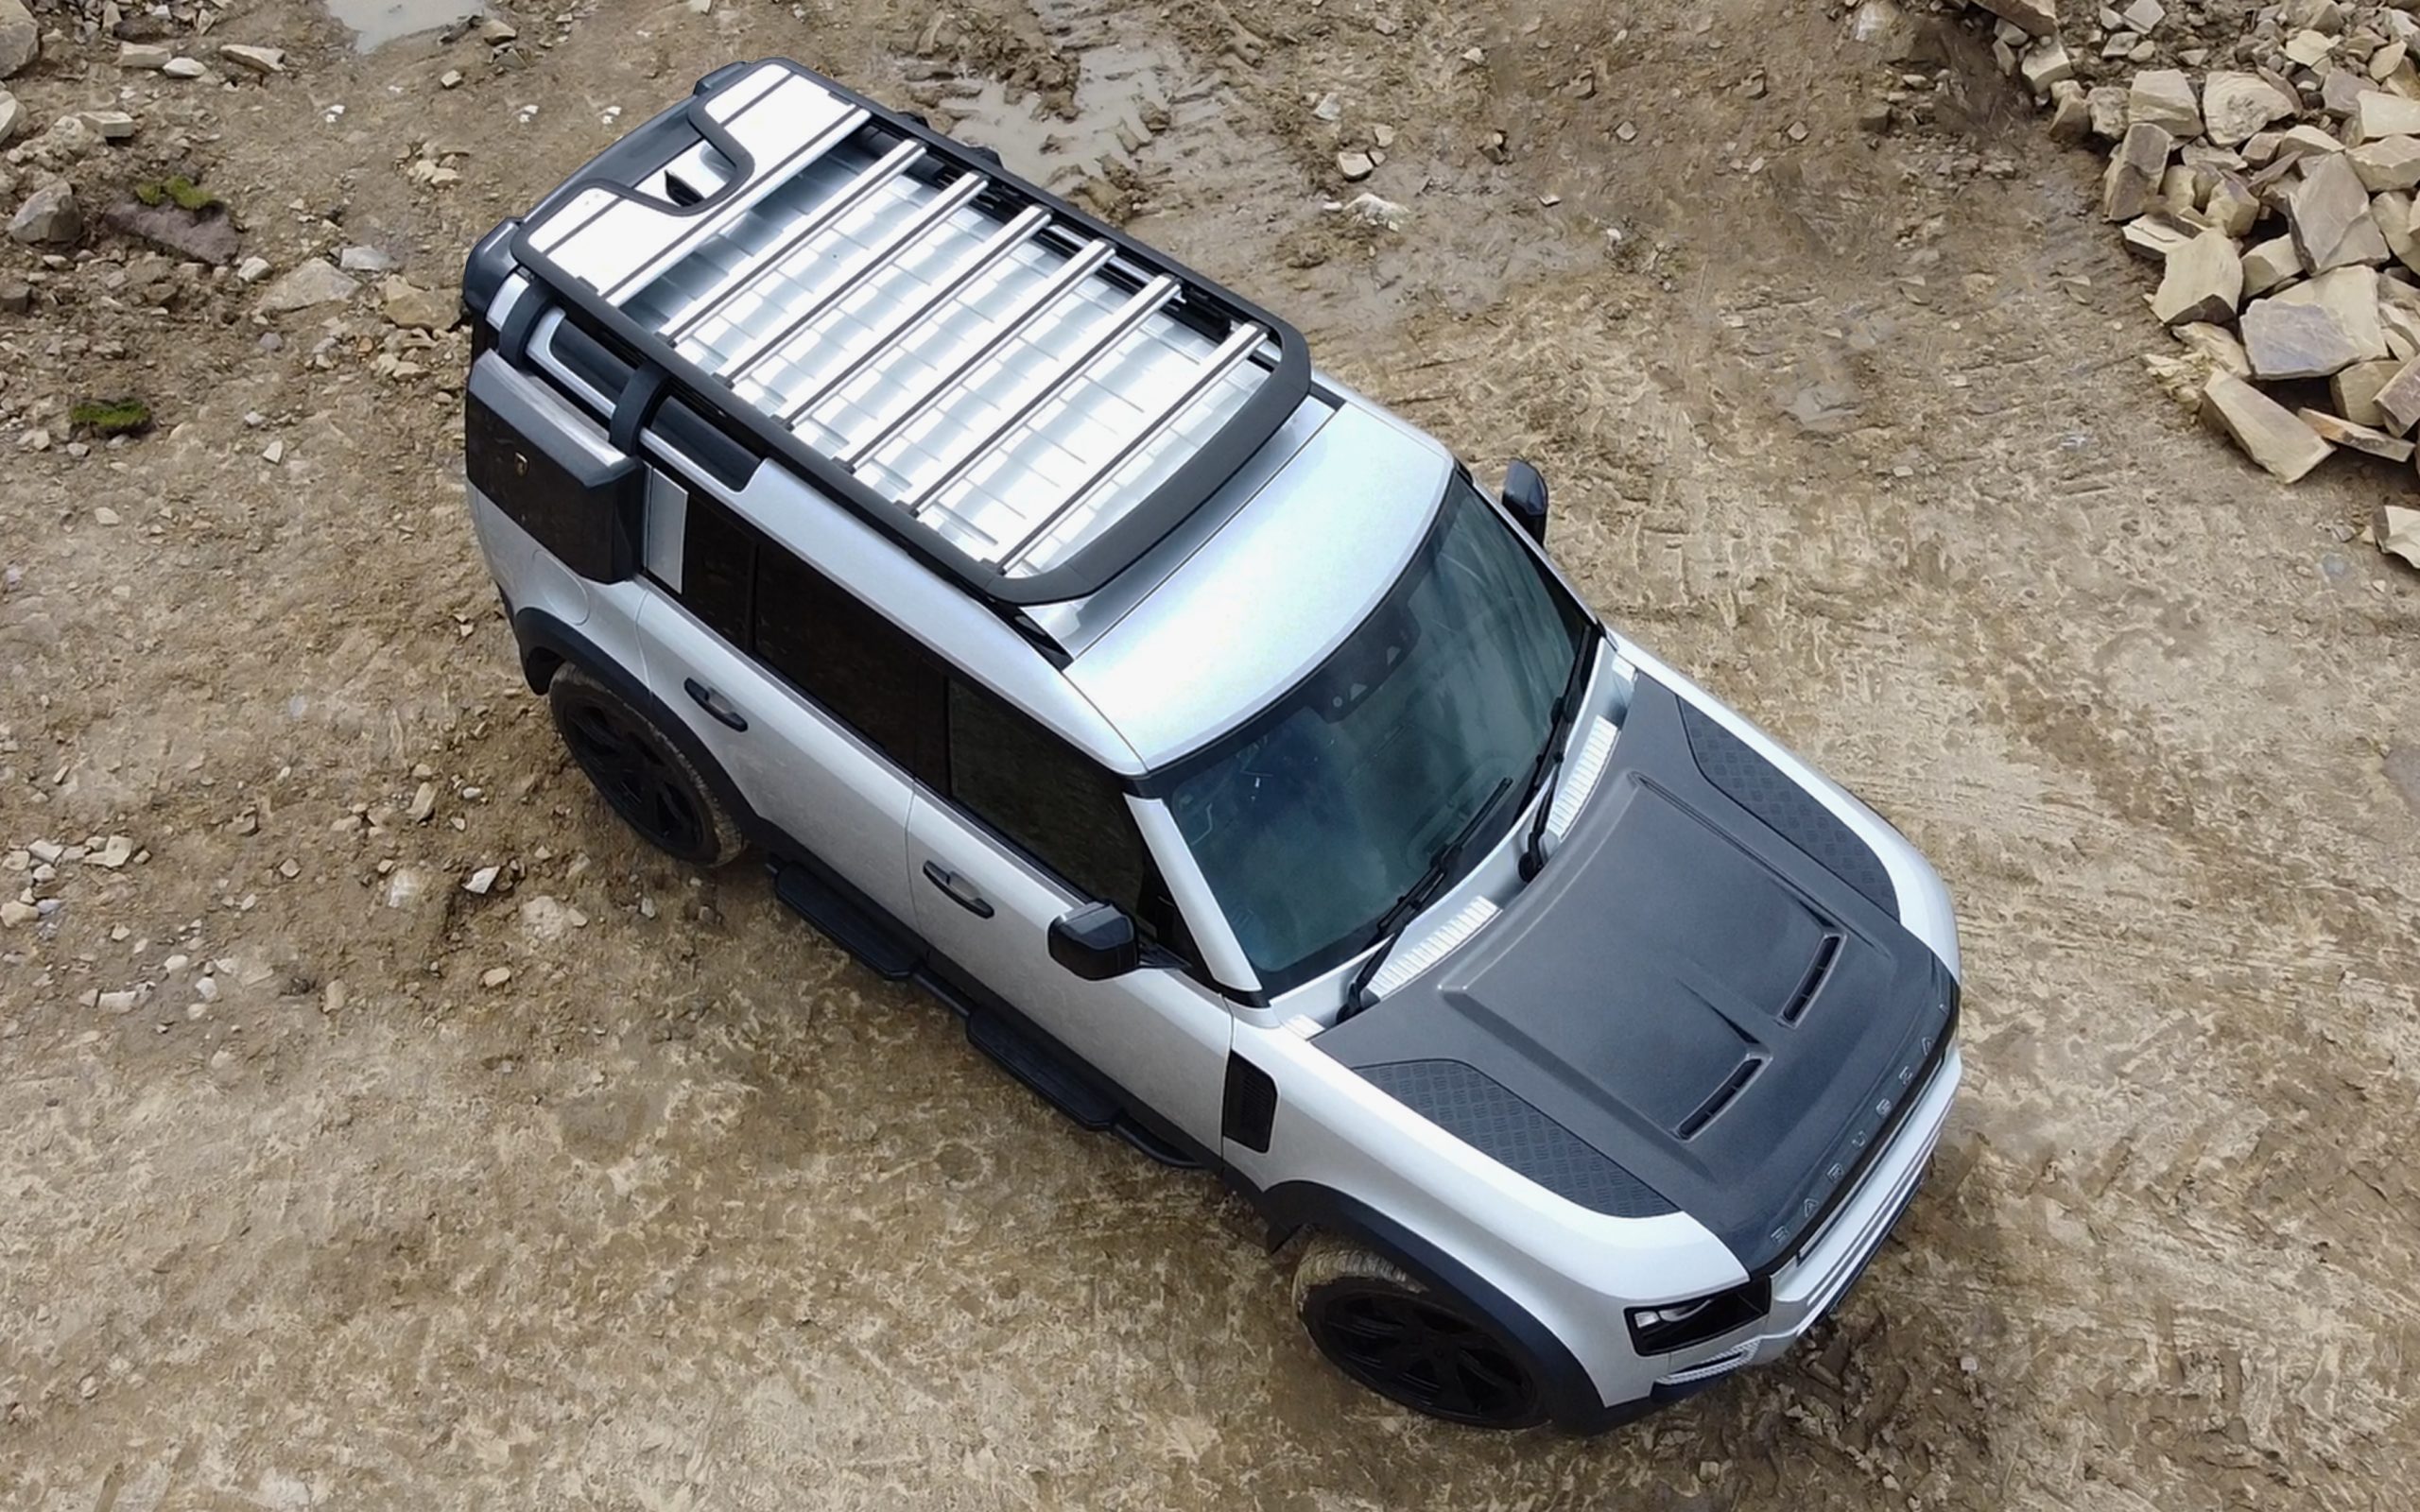 Barugzai Expedition body kit for Land Rover Defender